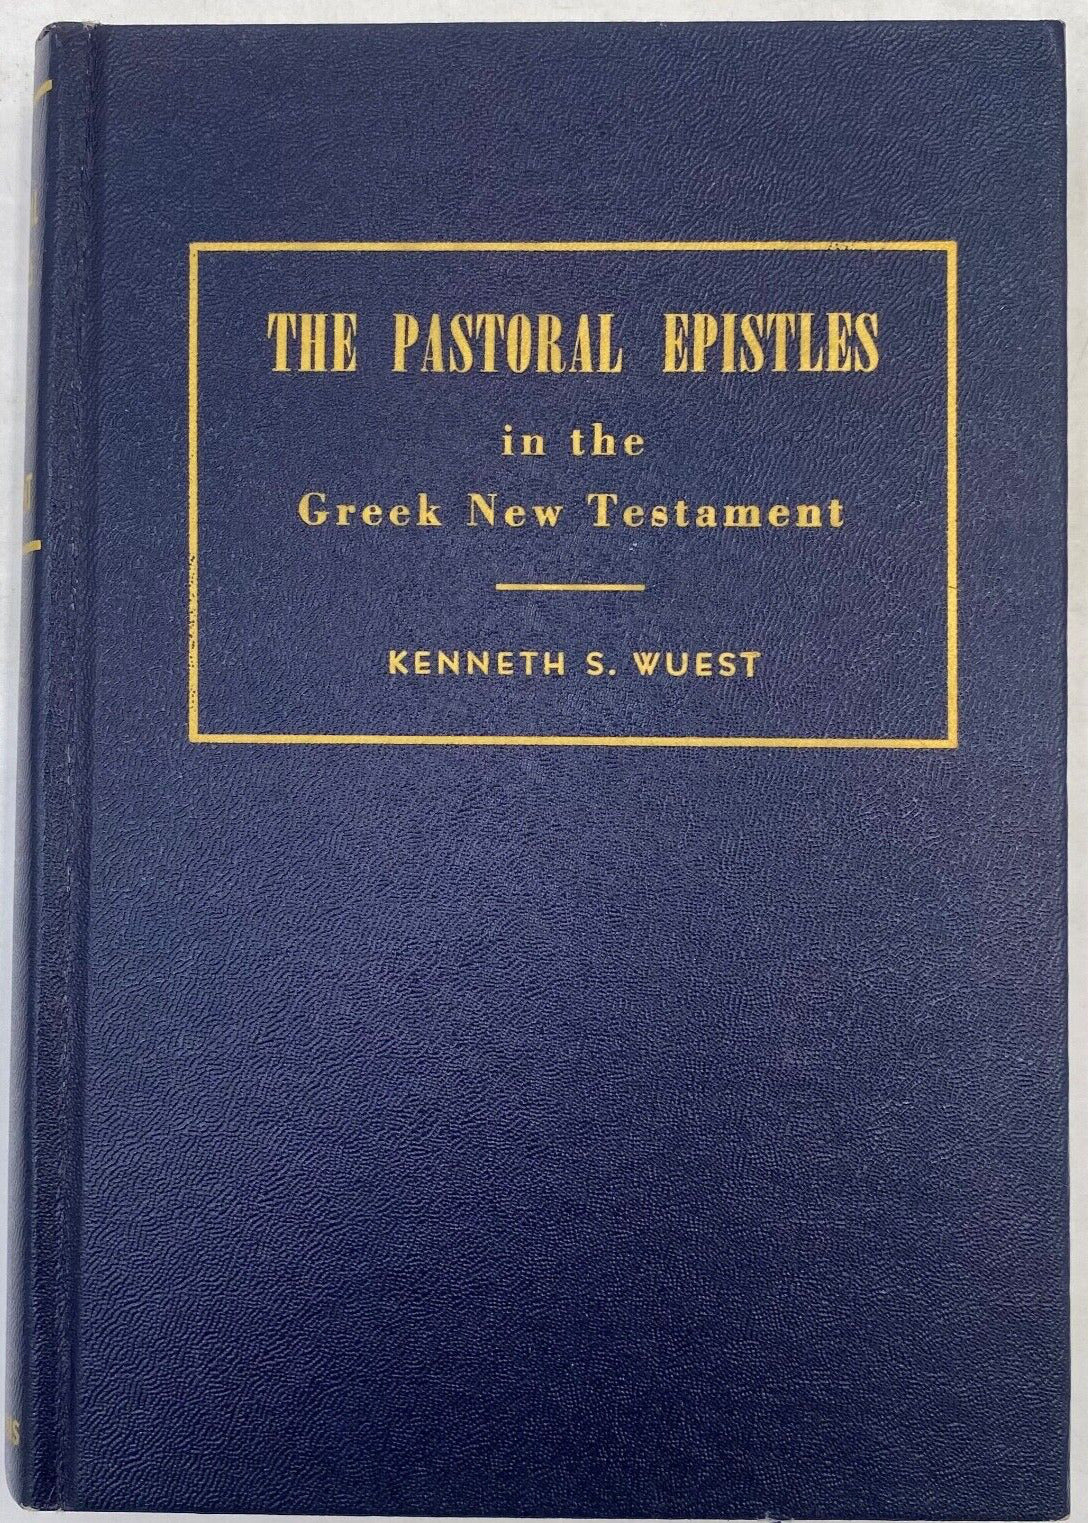 The Pastoral Epistles in the Greek New Testament by Kenneth S. Wuest 1960 HC